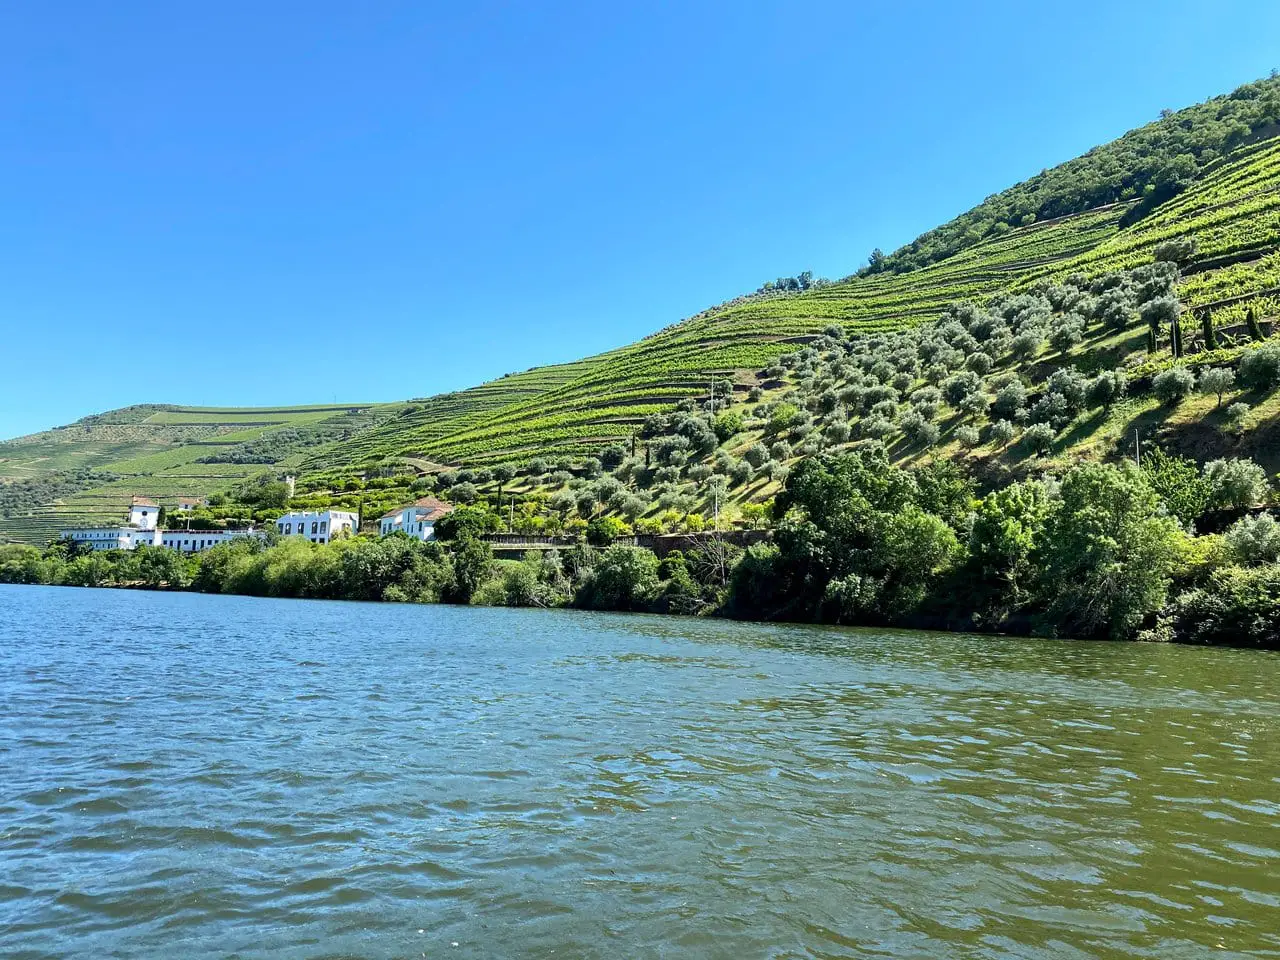 Vineyards next to a river